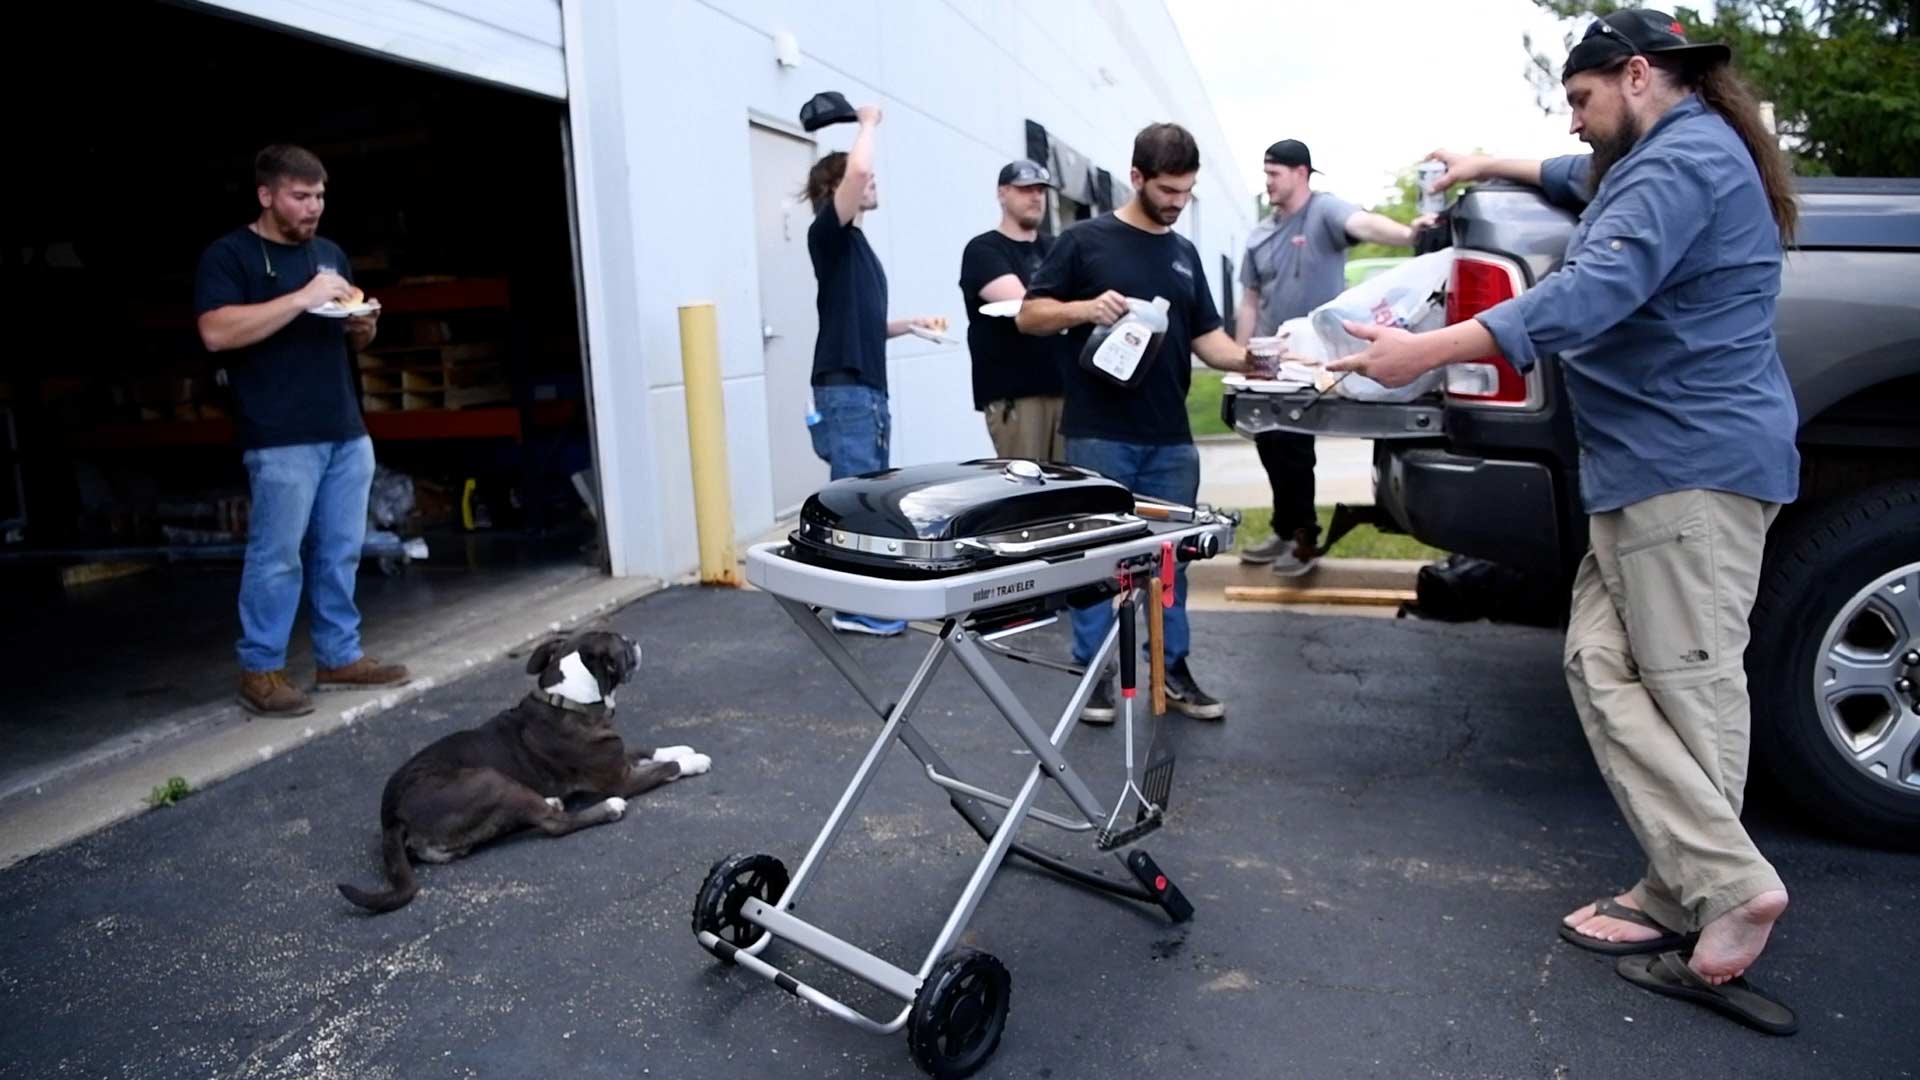 Ketch employees taking a break to cook out on the Weber Traveler grill.